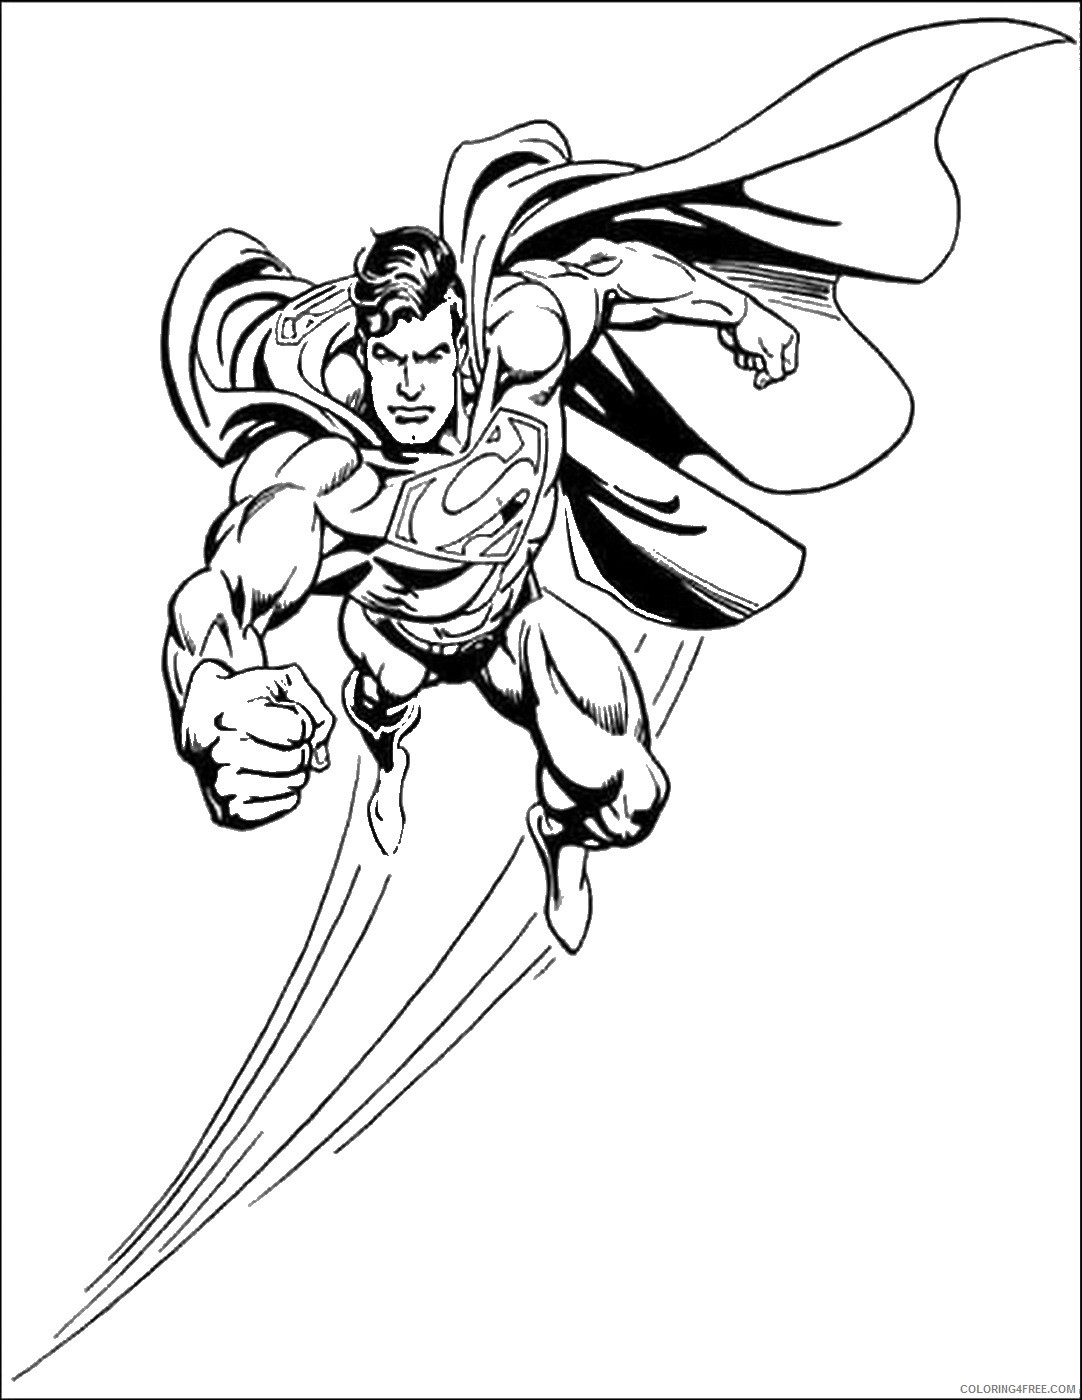 Superman Coloring Pages Superheroes Printable 2020 Coloring4free